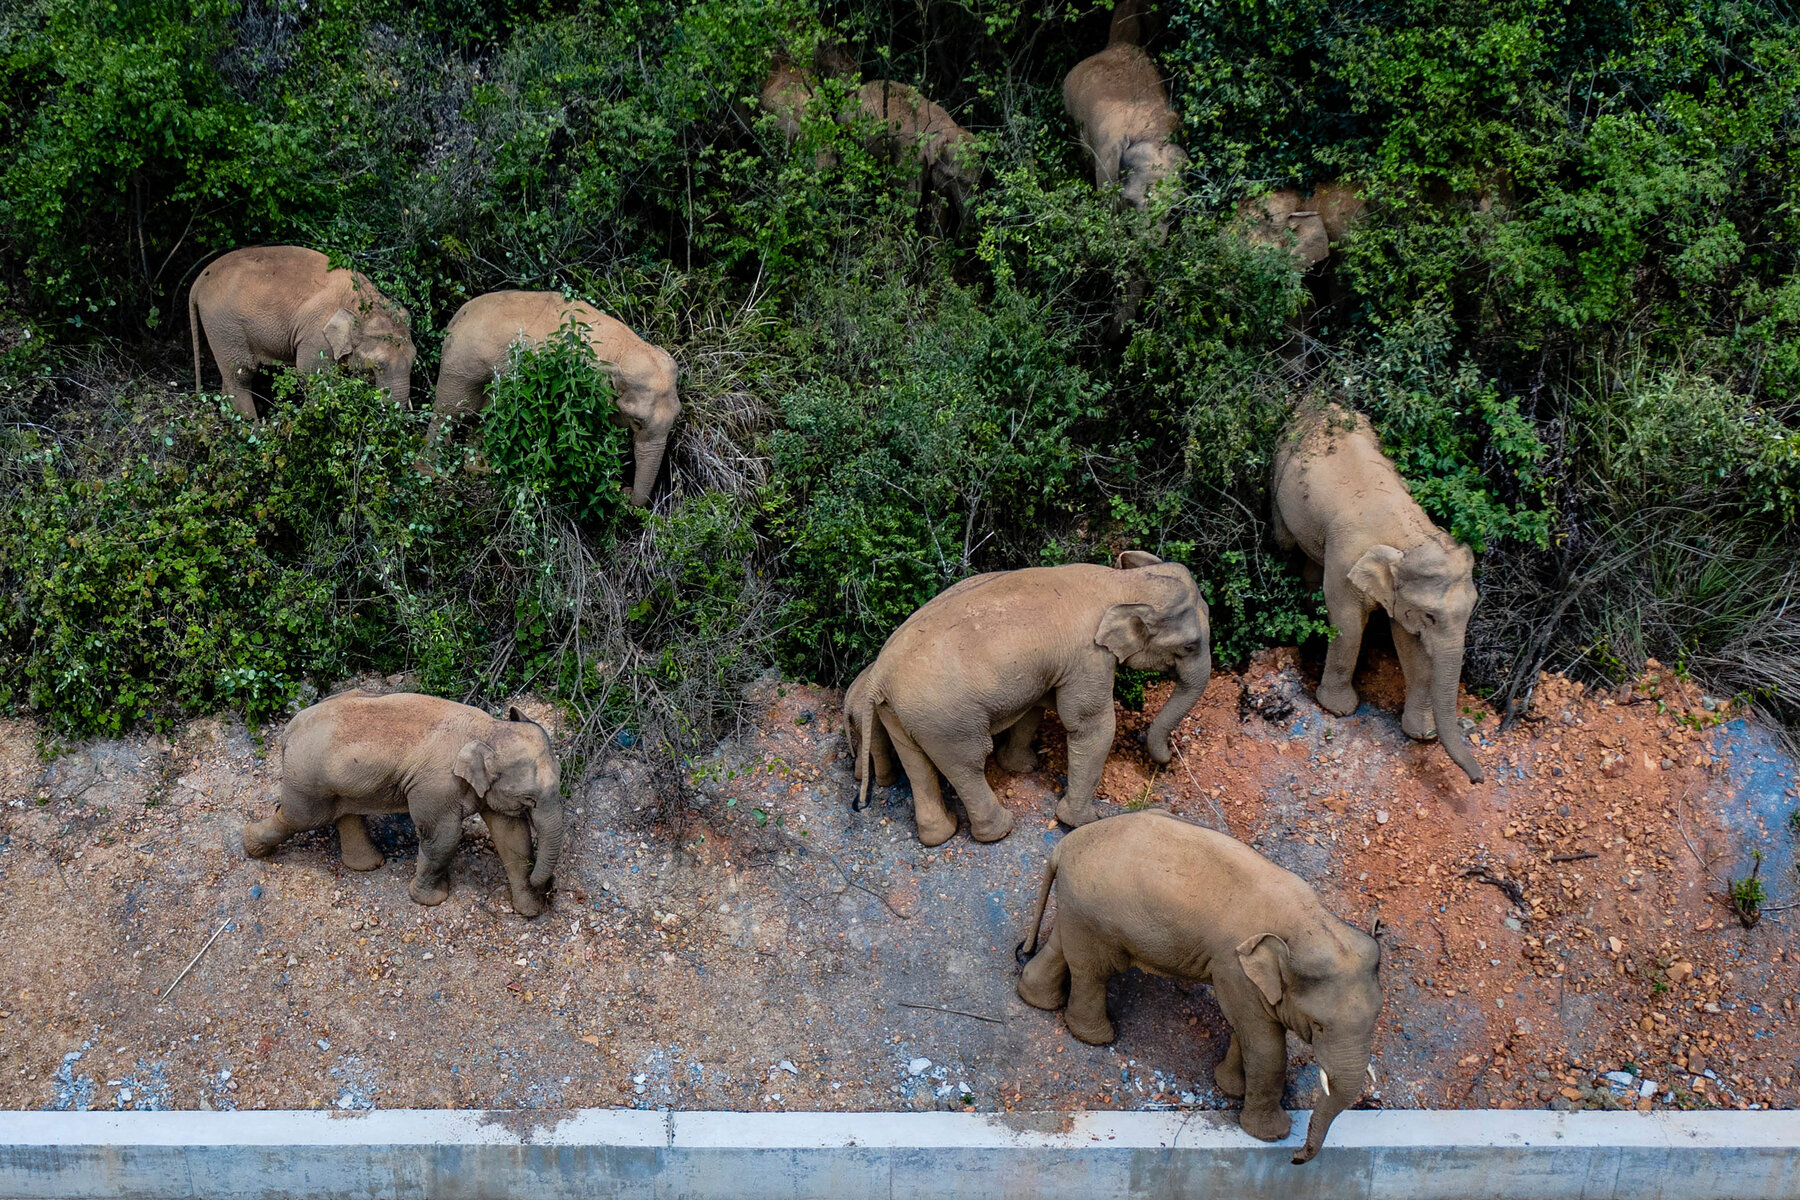 How many elephants were in the Kep herd?